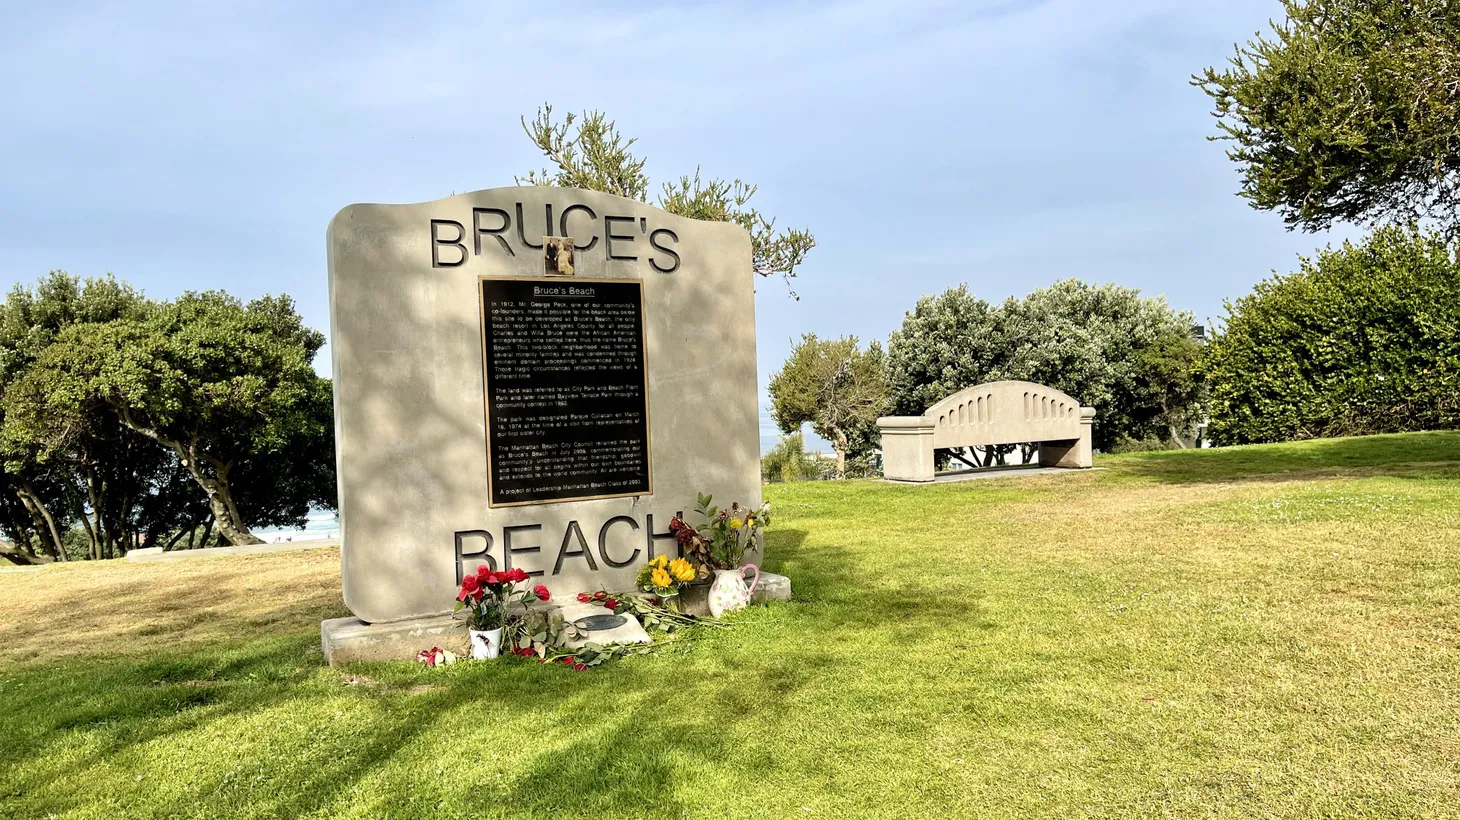 Bruce’s Beach can’t be developed because the City of Manhattan Beach zoned it as a park. The process to change the zoning could take years and face potential legal challenges, according to attorney George Fatheree III.